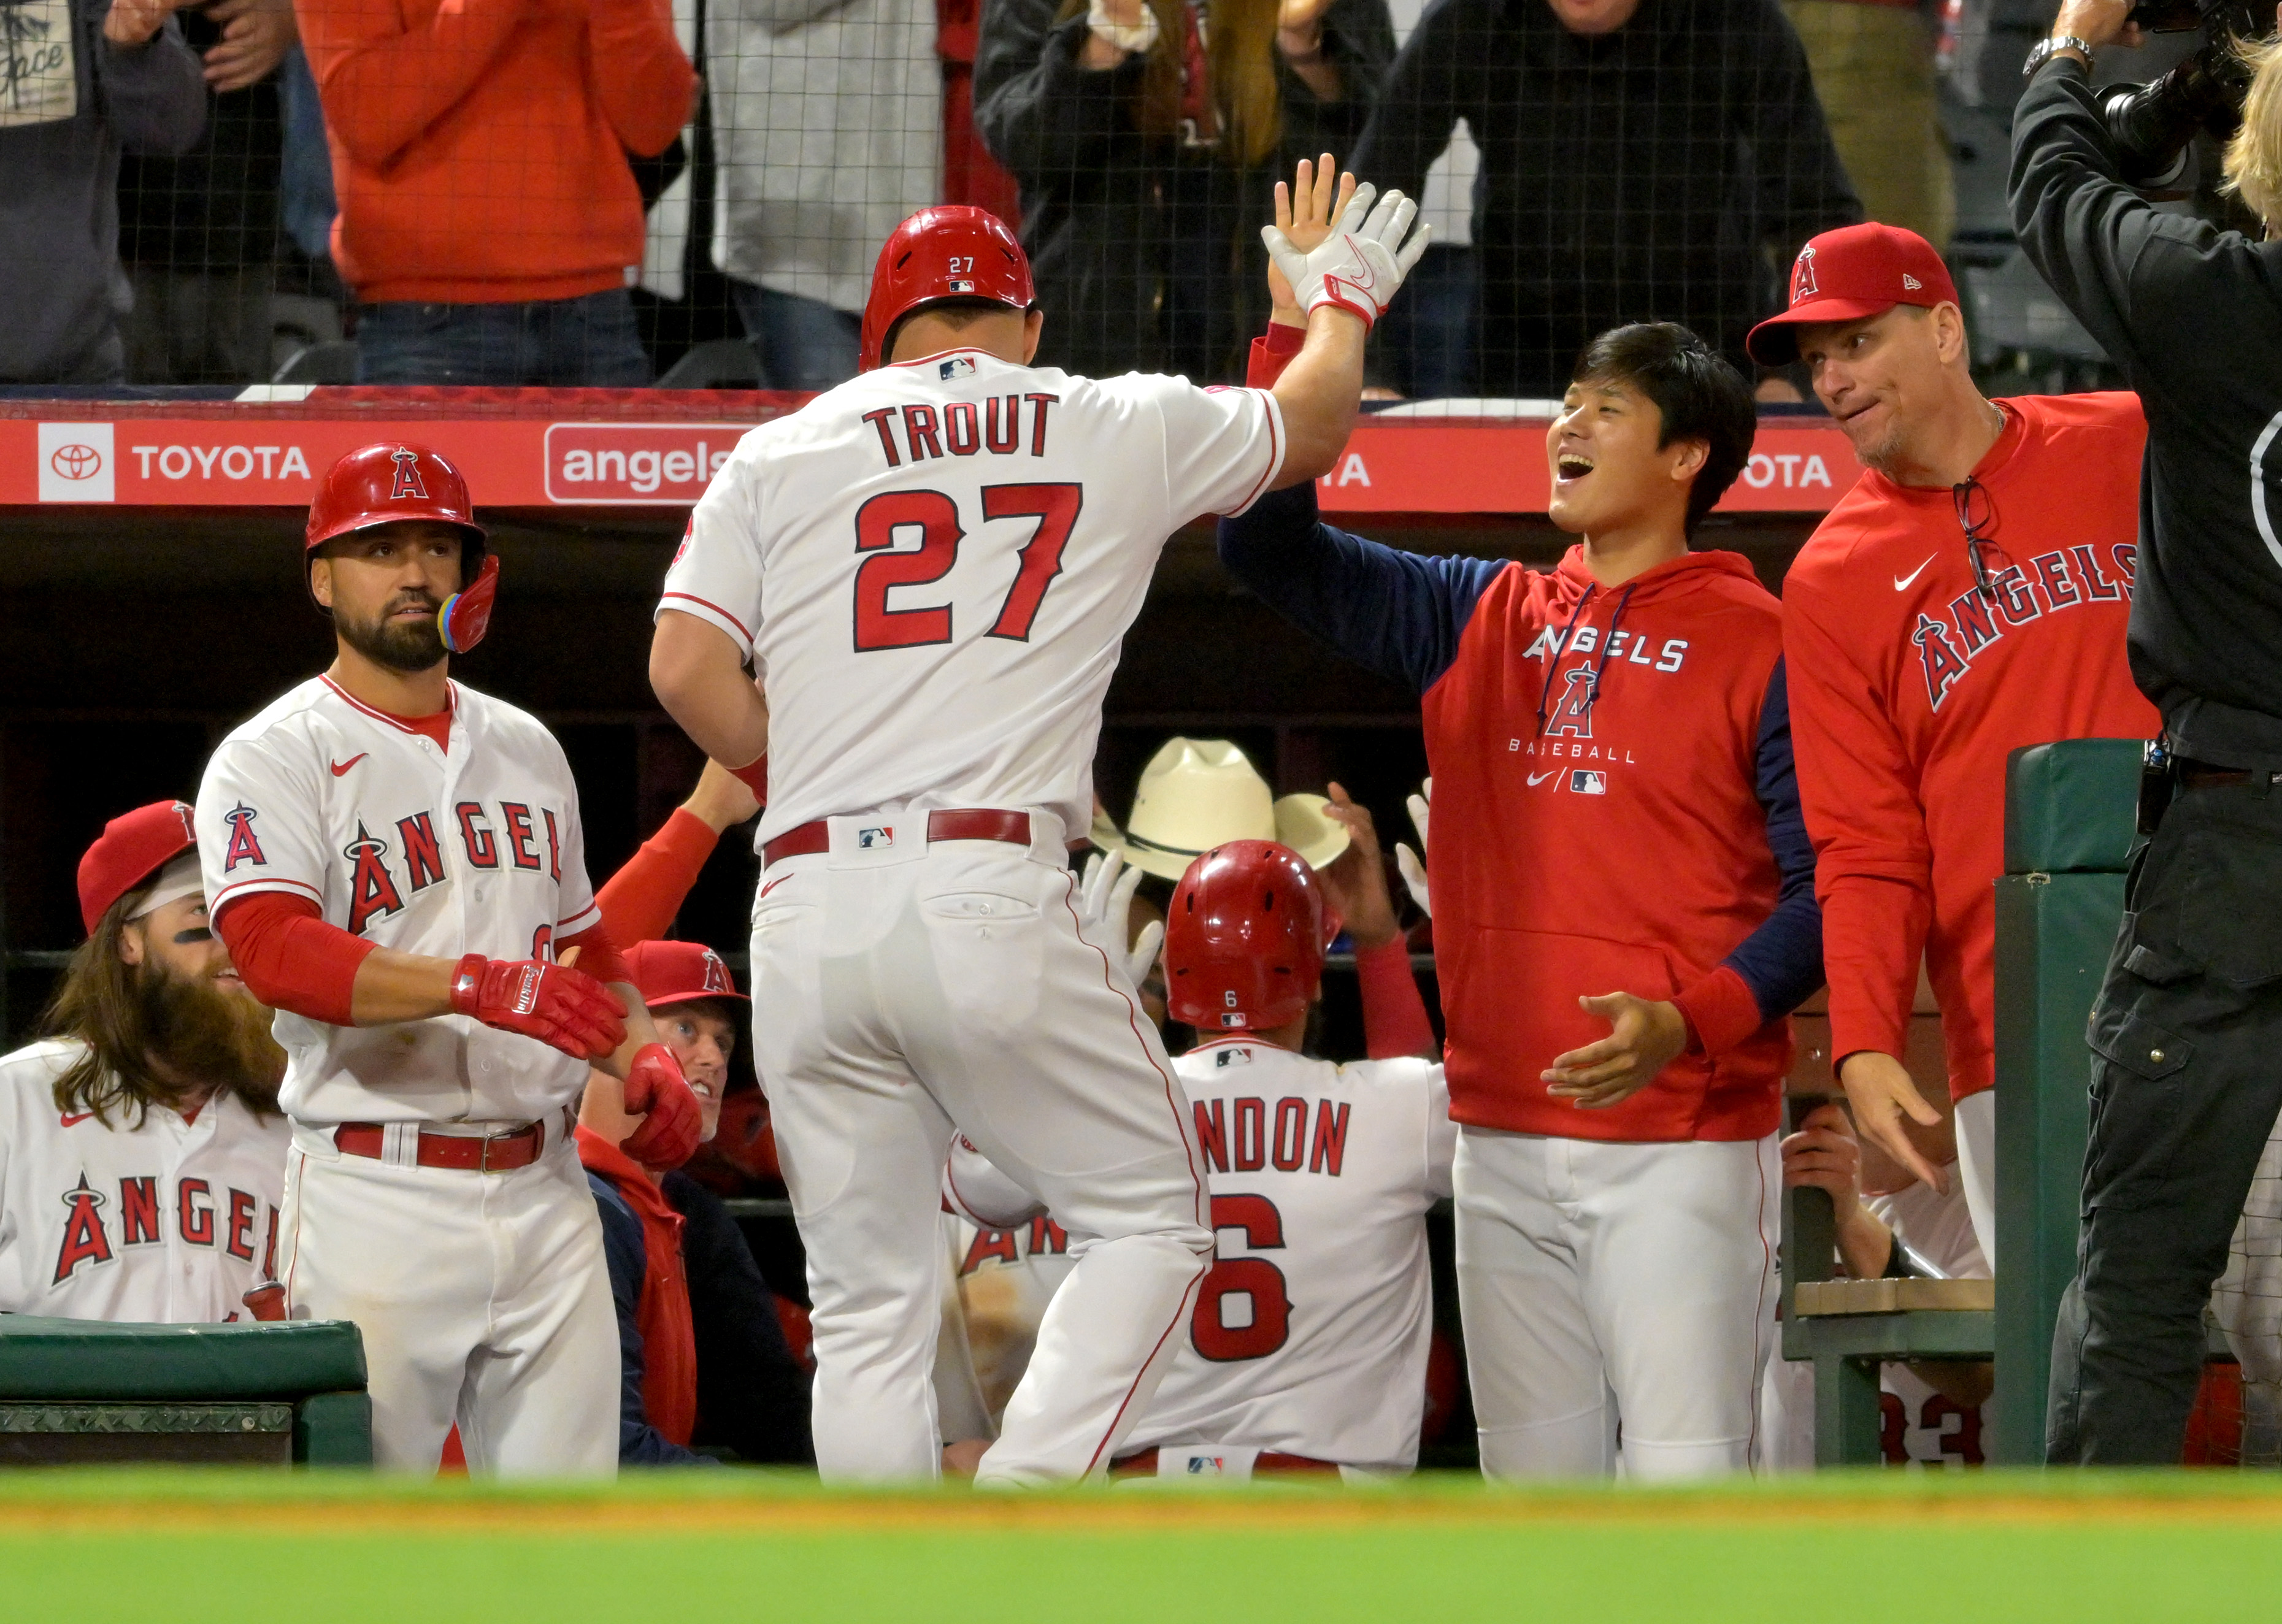 Can Andrew Velazquez play consistently in the future for the LA Angels?